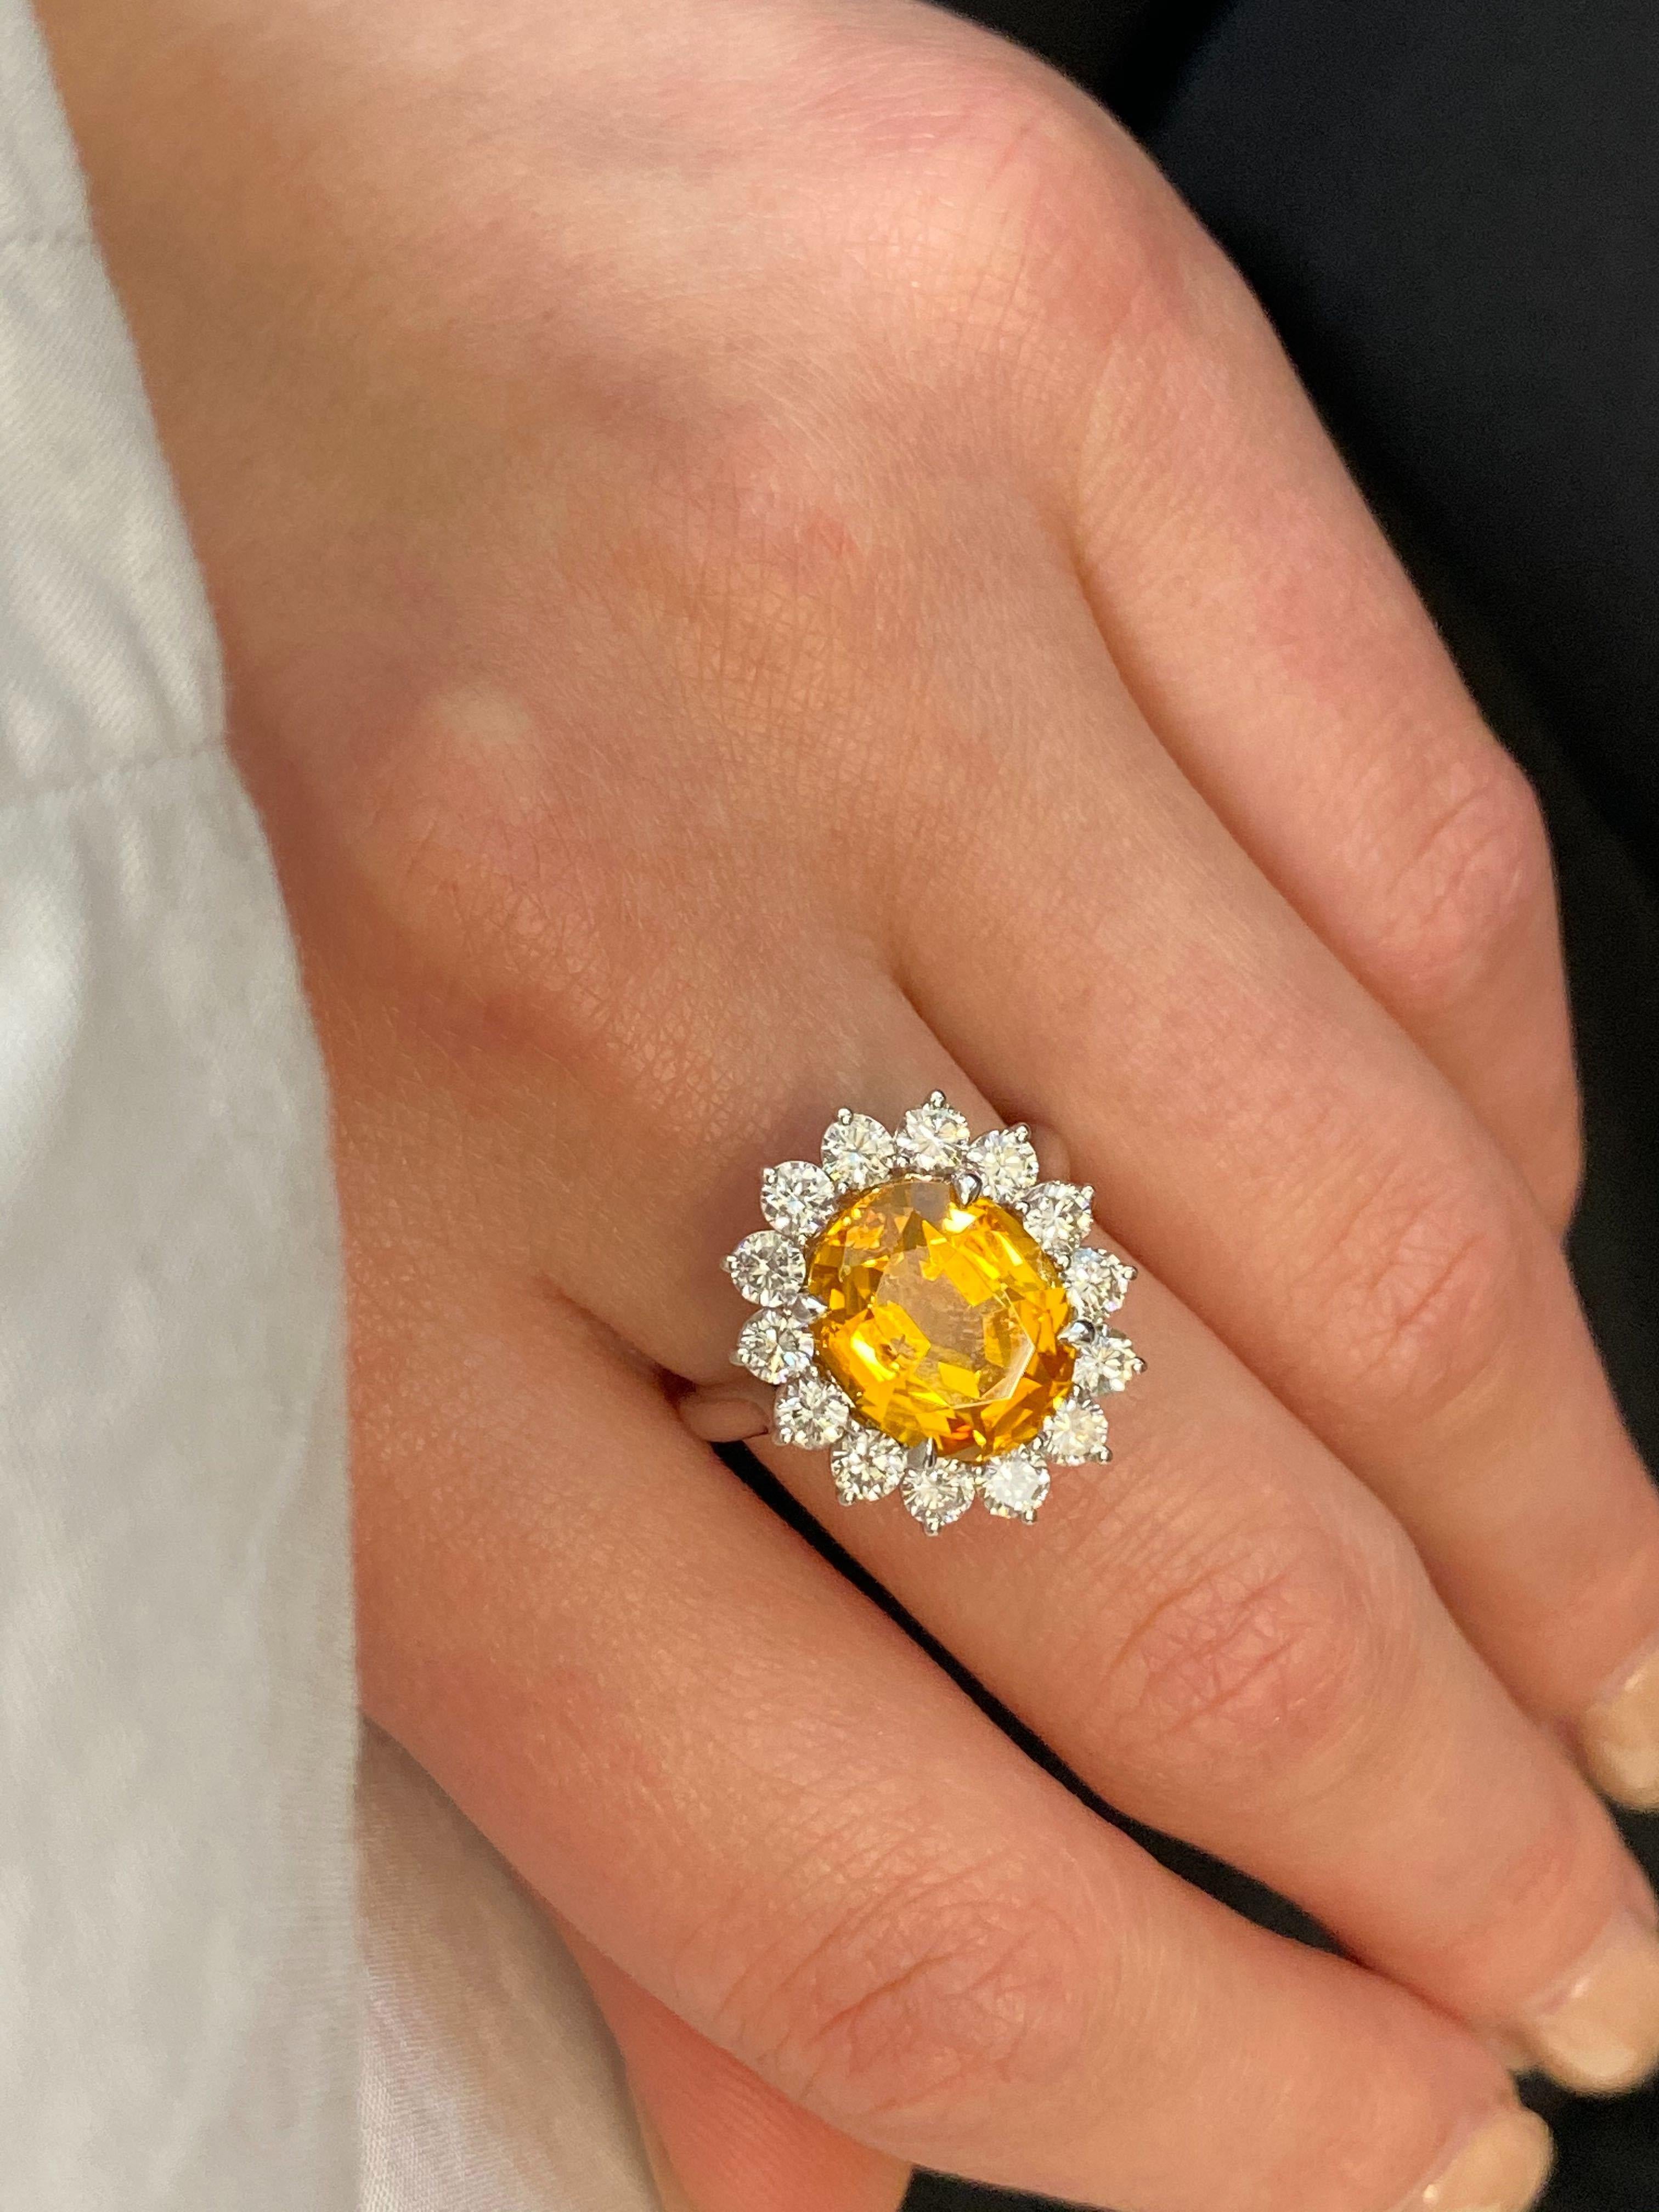 Rachel Koen 18K White Gold Yellow Oval Sapphire and Diamonds Ring 5.46ct In New Condition For Sale In New York, NY